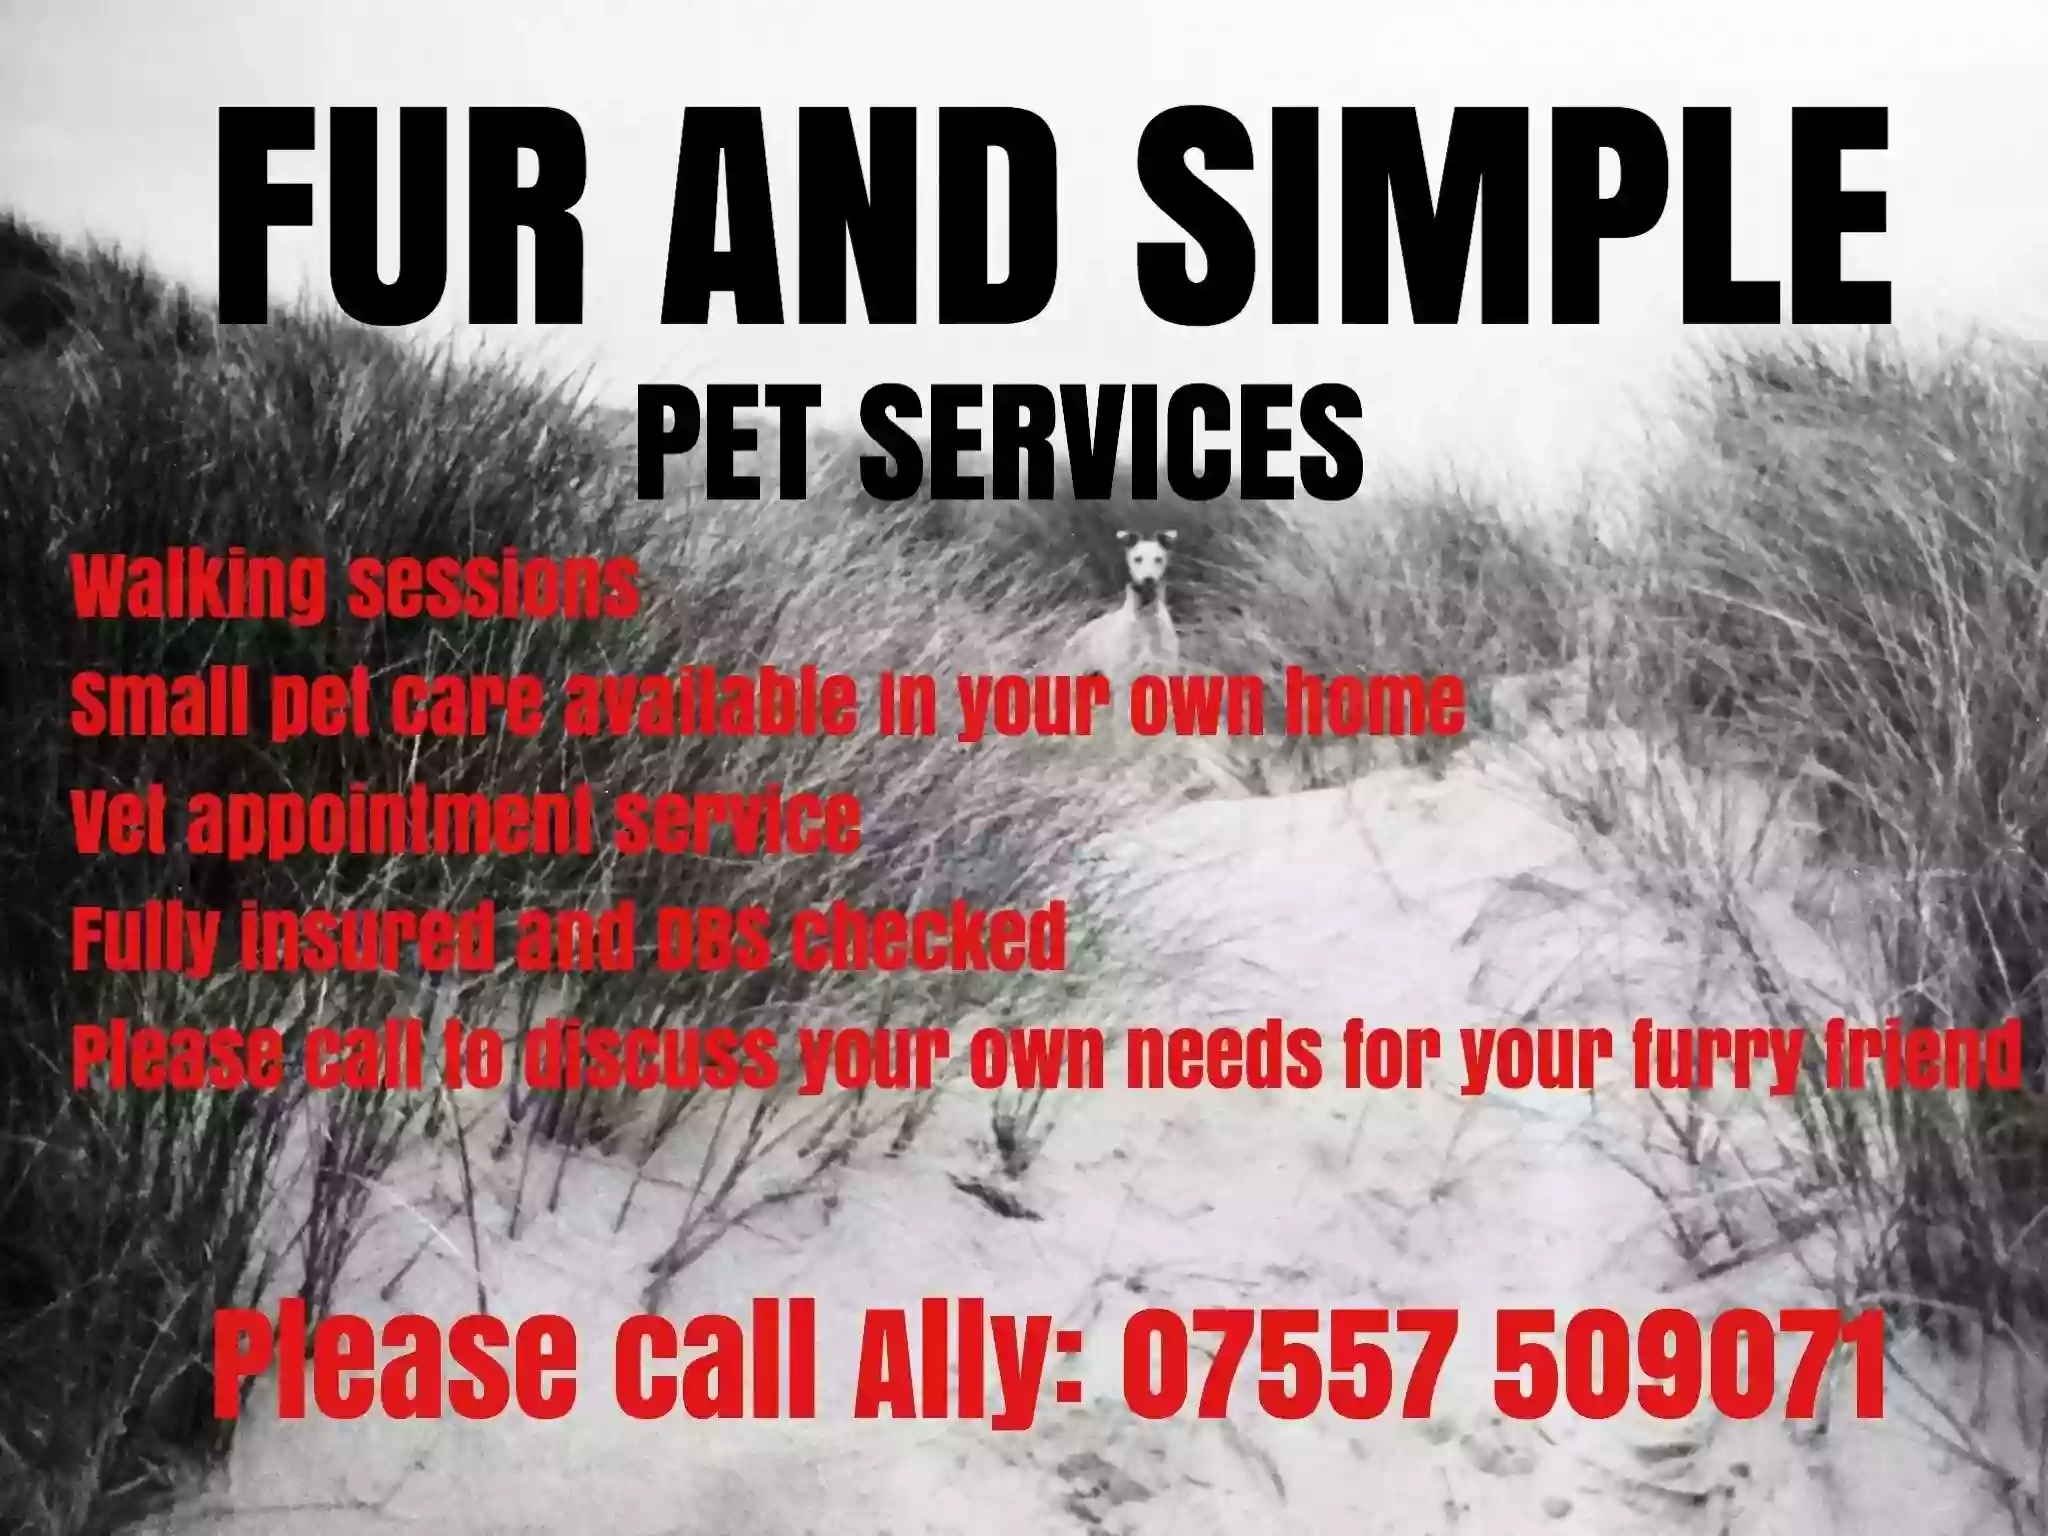 Fur and simple pet services